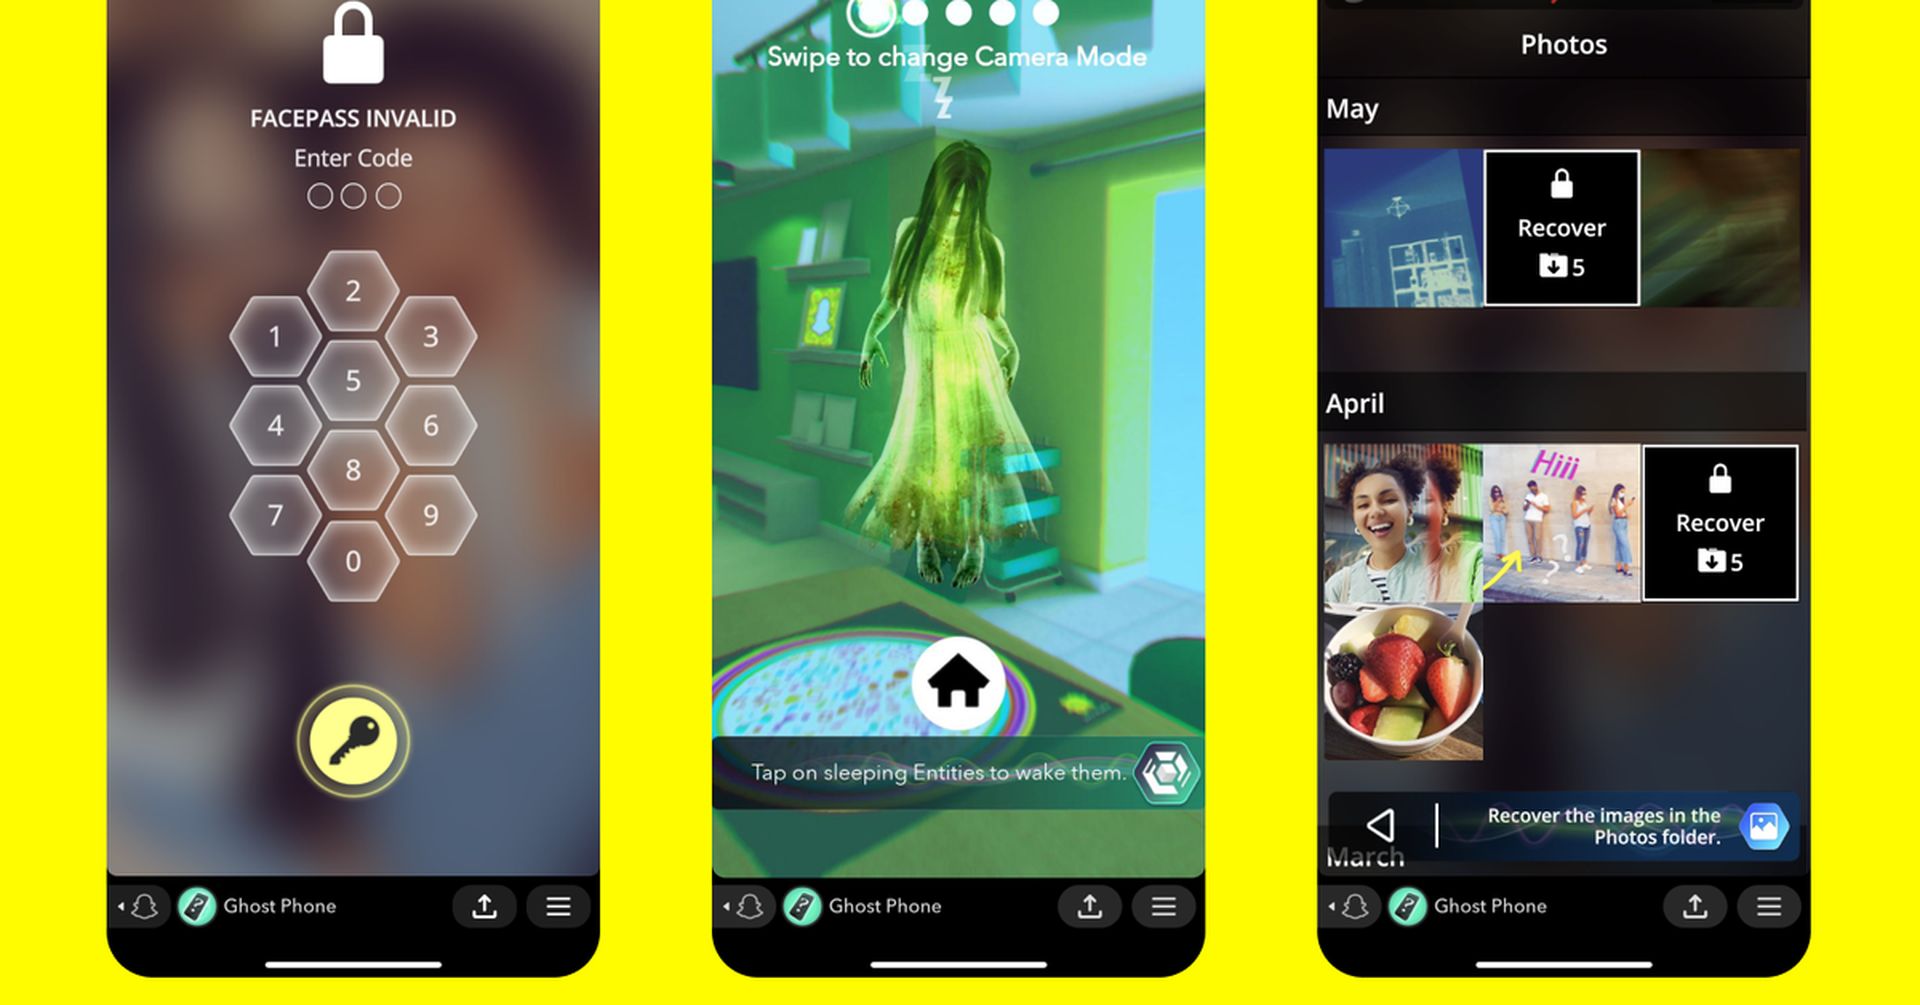 In this article, we are going to be covering the Snapchat ghost phone game, the first AR game where you hunt ghosts.